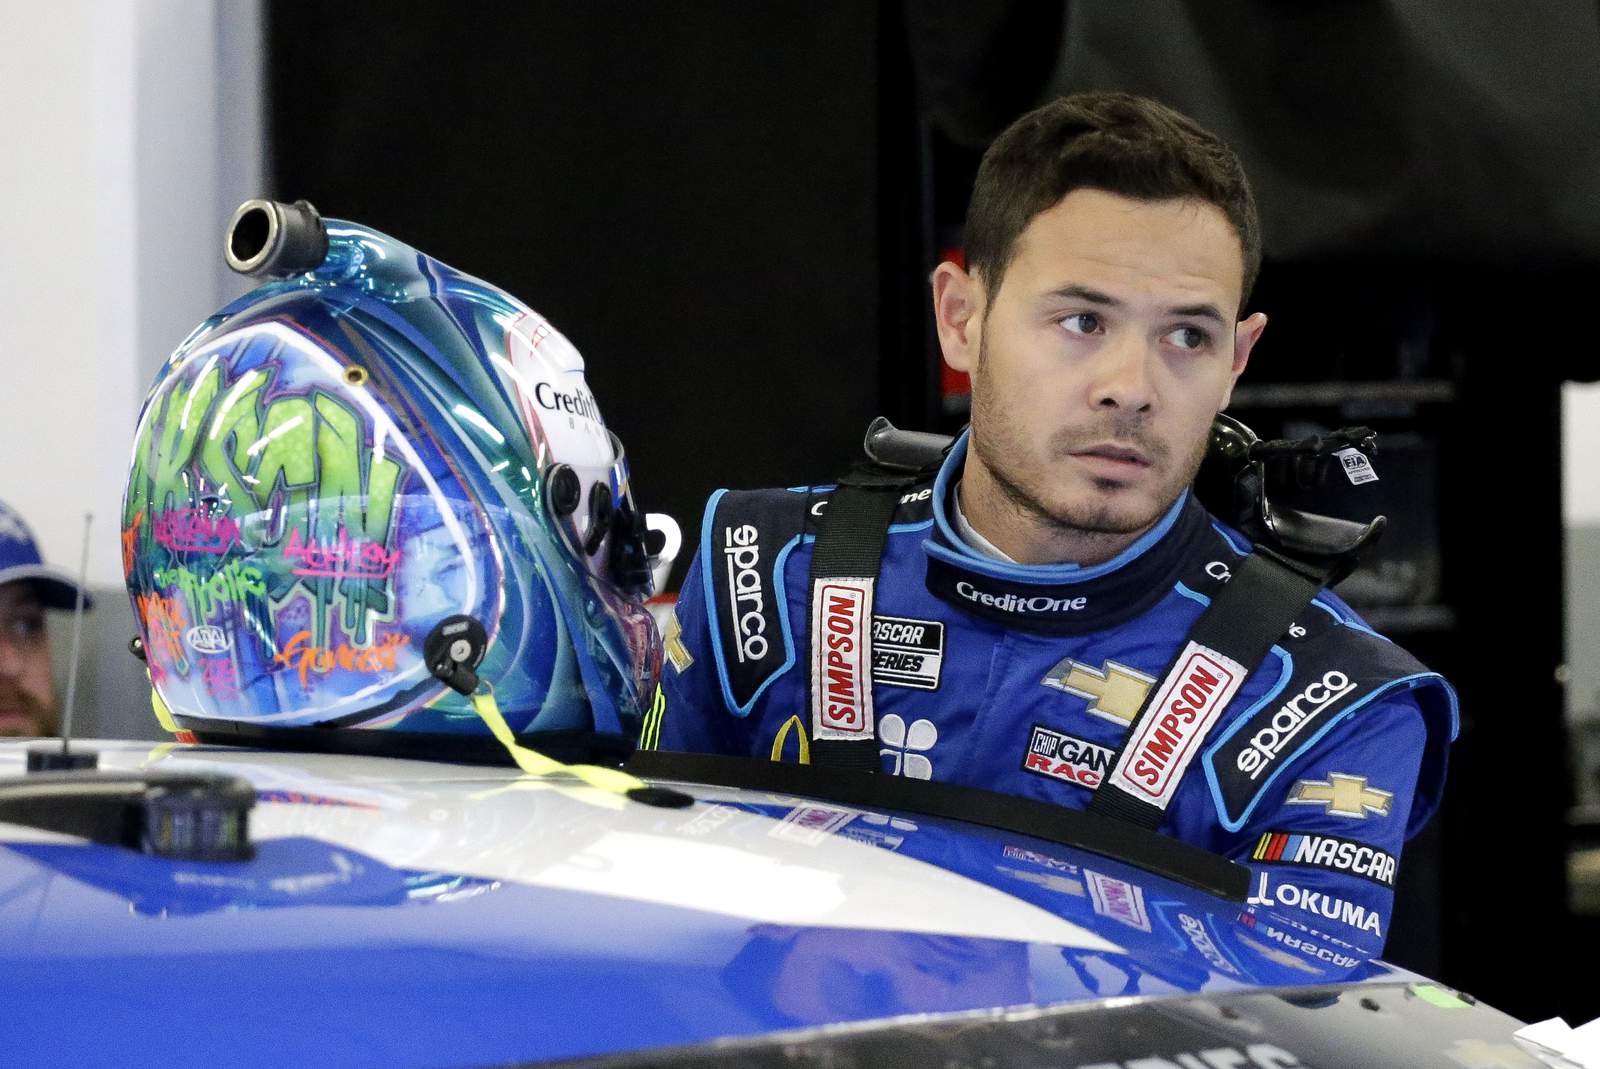 Kyle Larson reinstated to compete in NASCAR in 2021